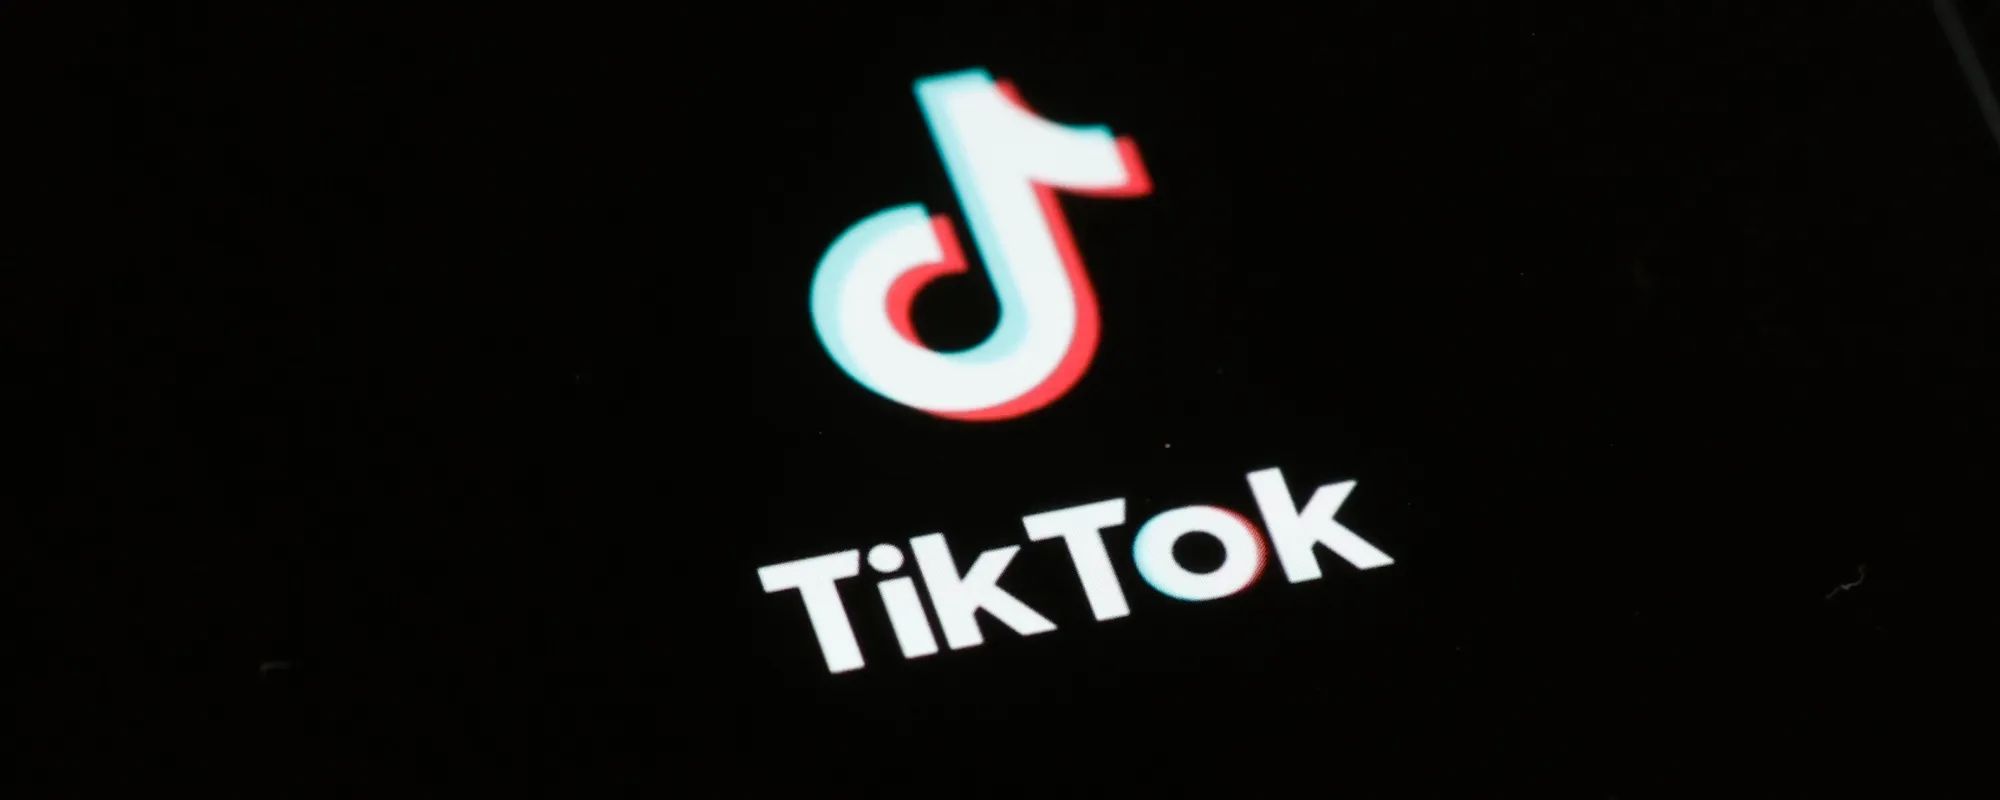 Universal Music Group May Be Looking to Take Serious Legal Action Against TikTok